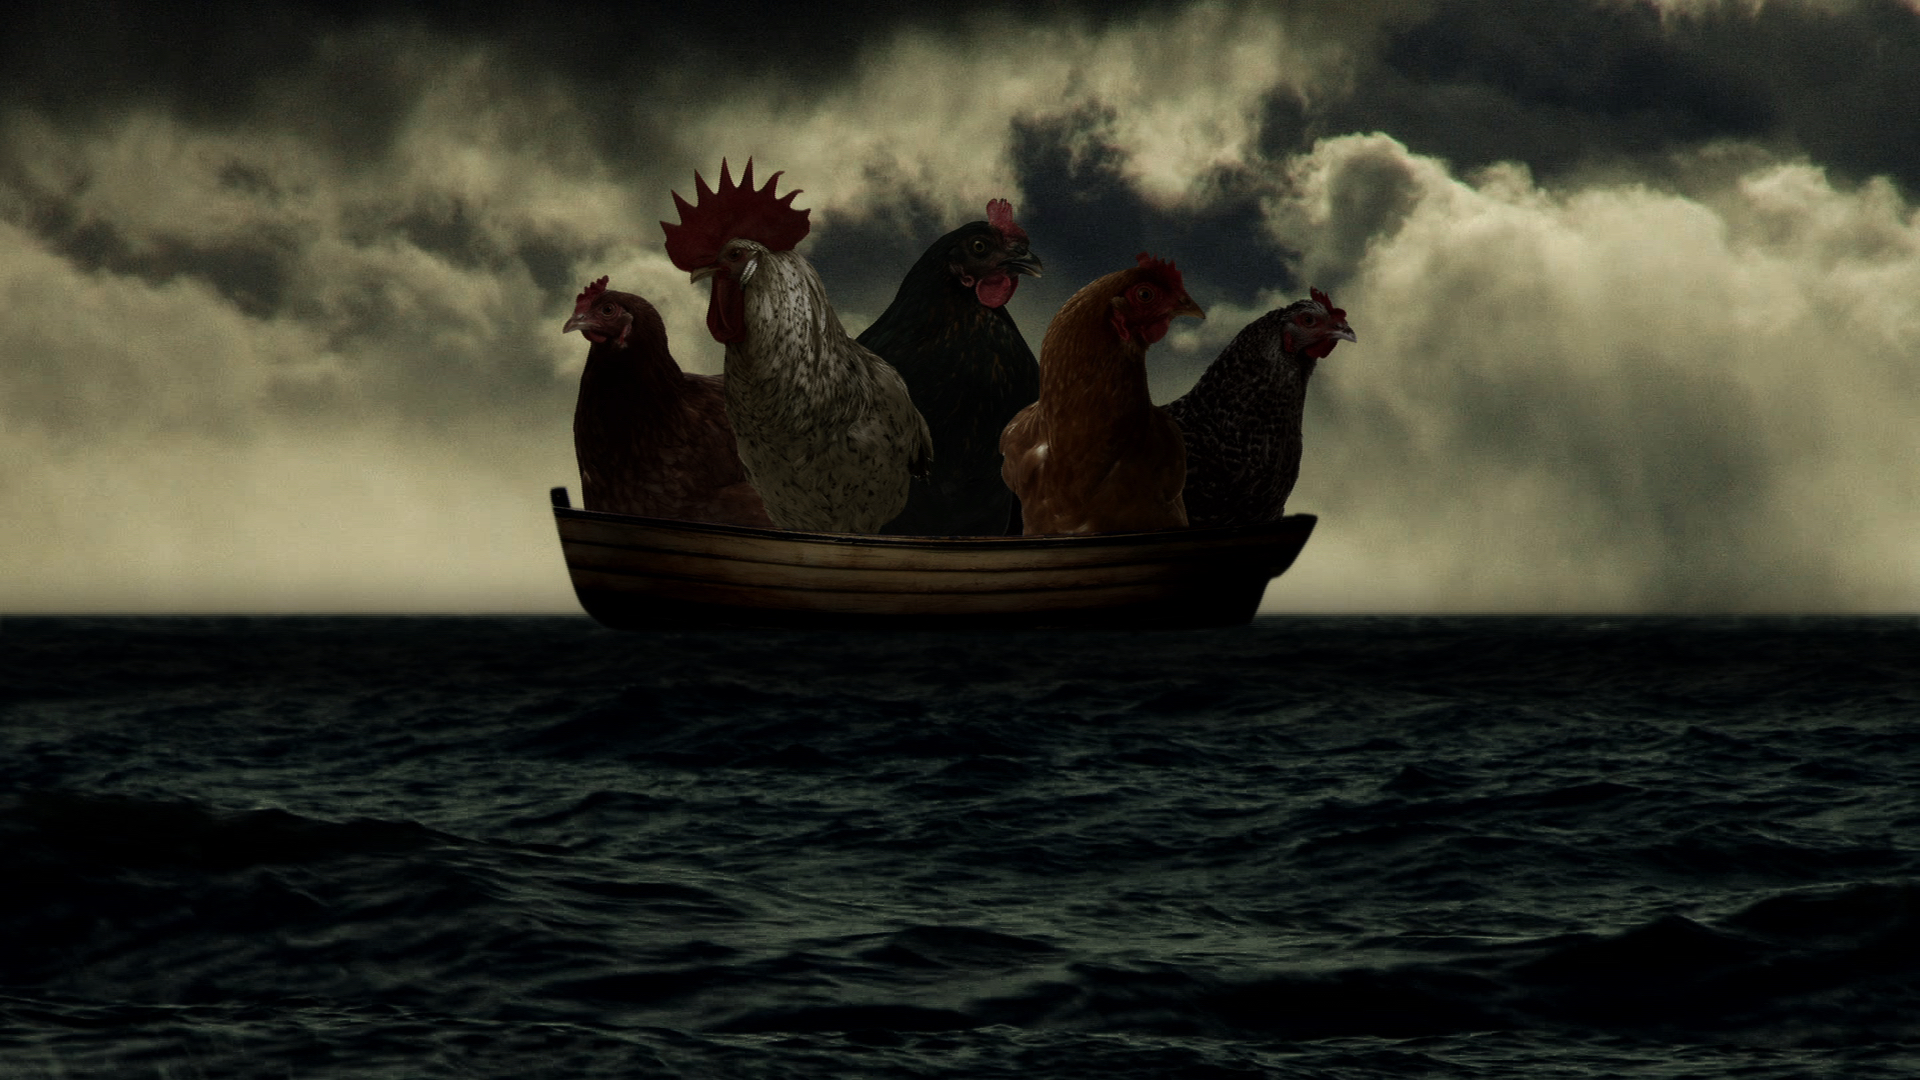 The Anatomical Universe-Chickens in Boat.jpg